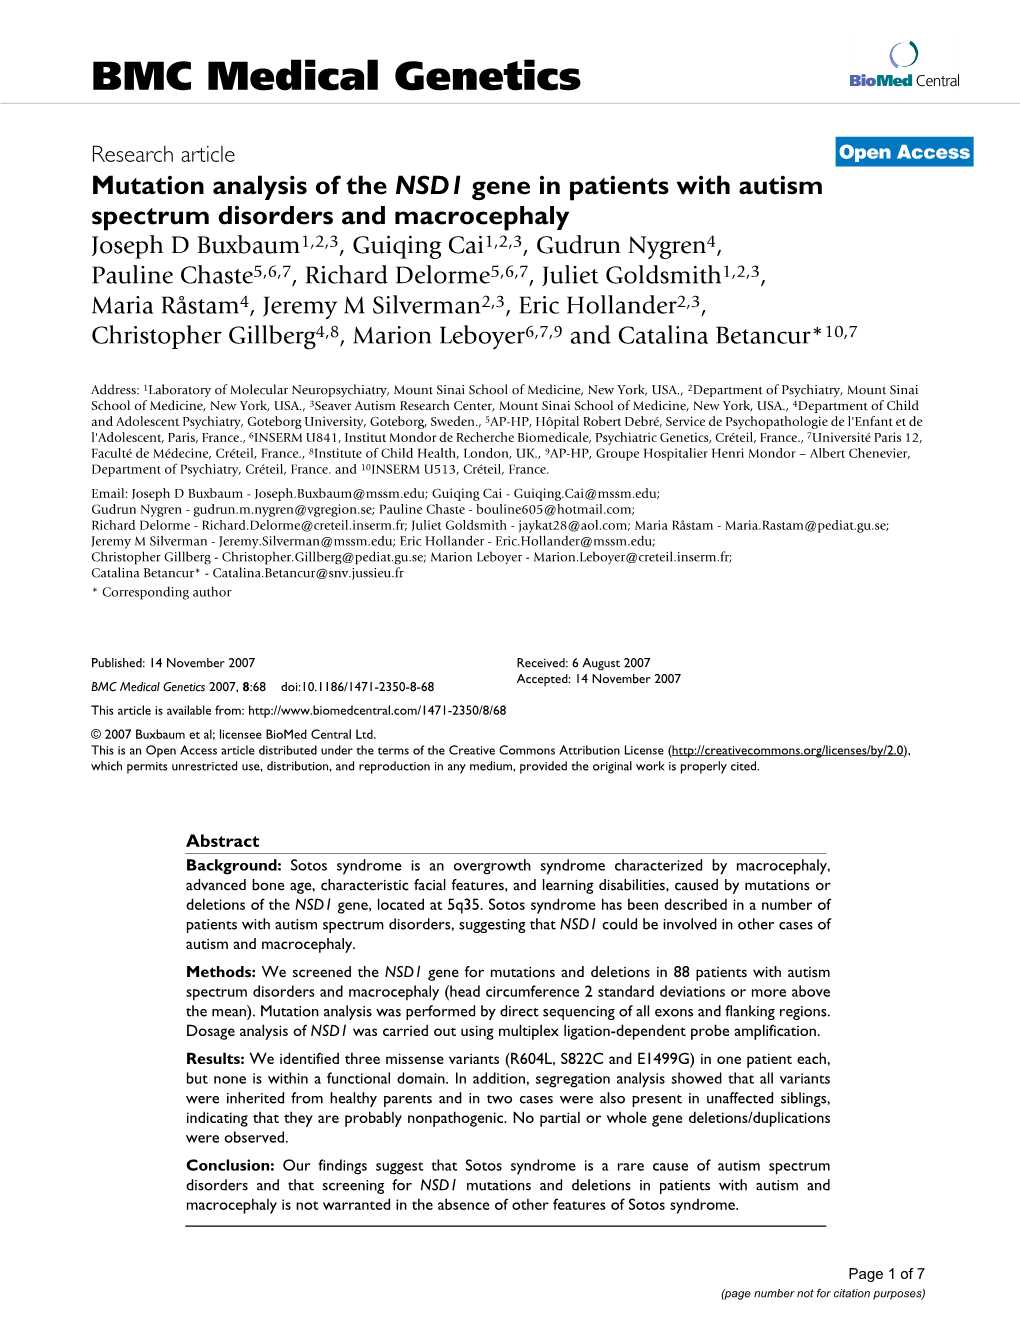 Mutation Analysis of the NSD1 Gene in Patients with Autism Spectrum